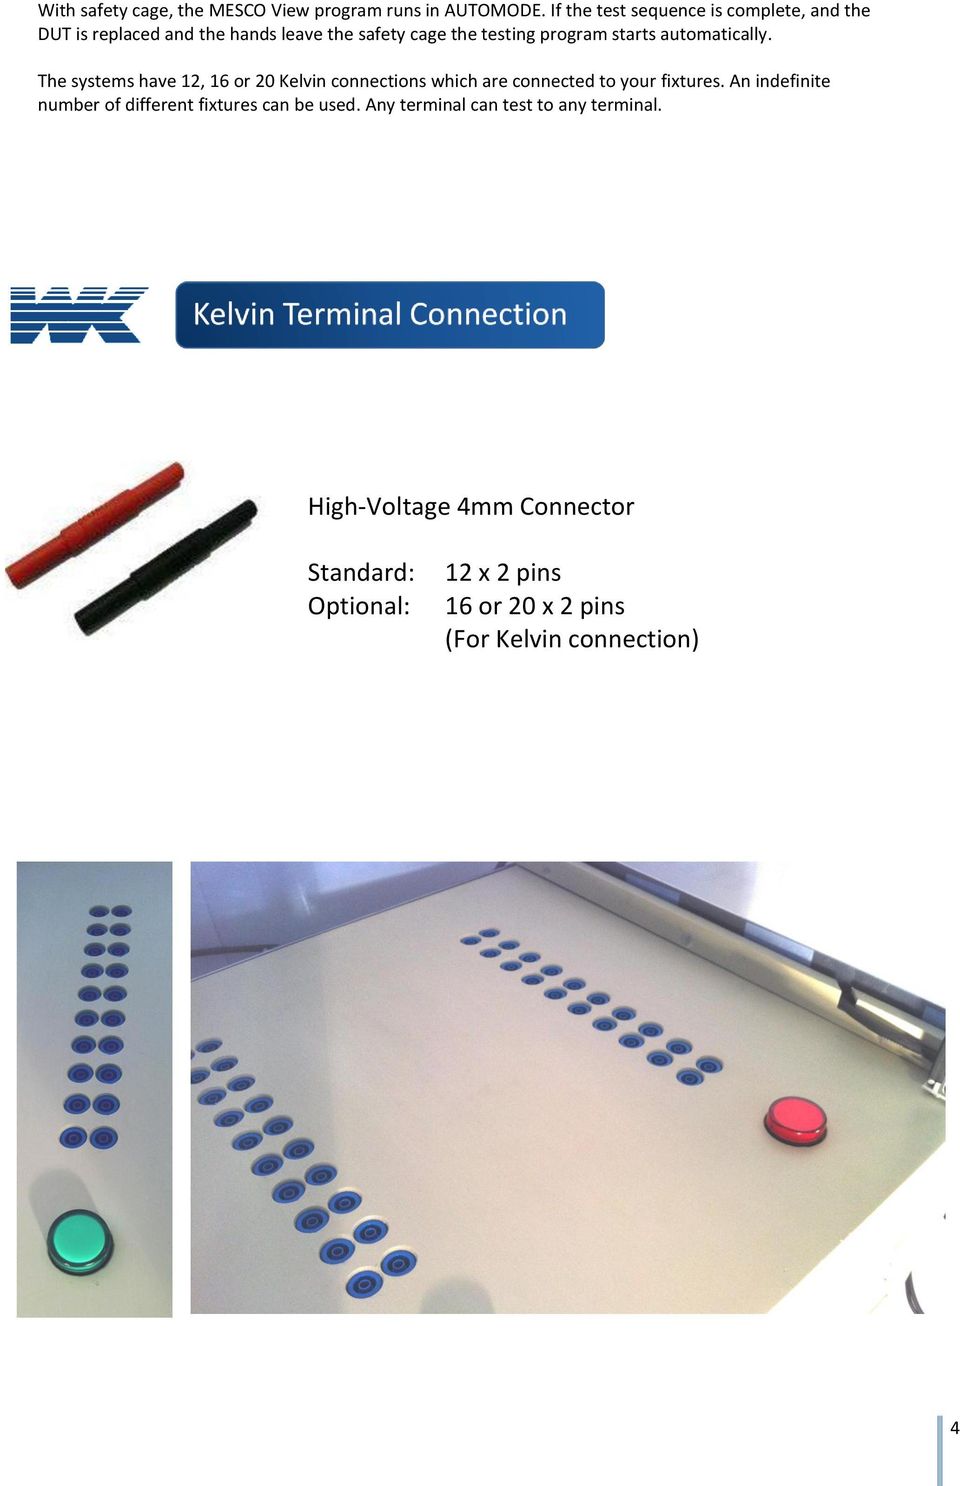 starts automatically. The systems have 12, 16 or 20 Kelvin connections which are connected to your fixtures.